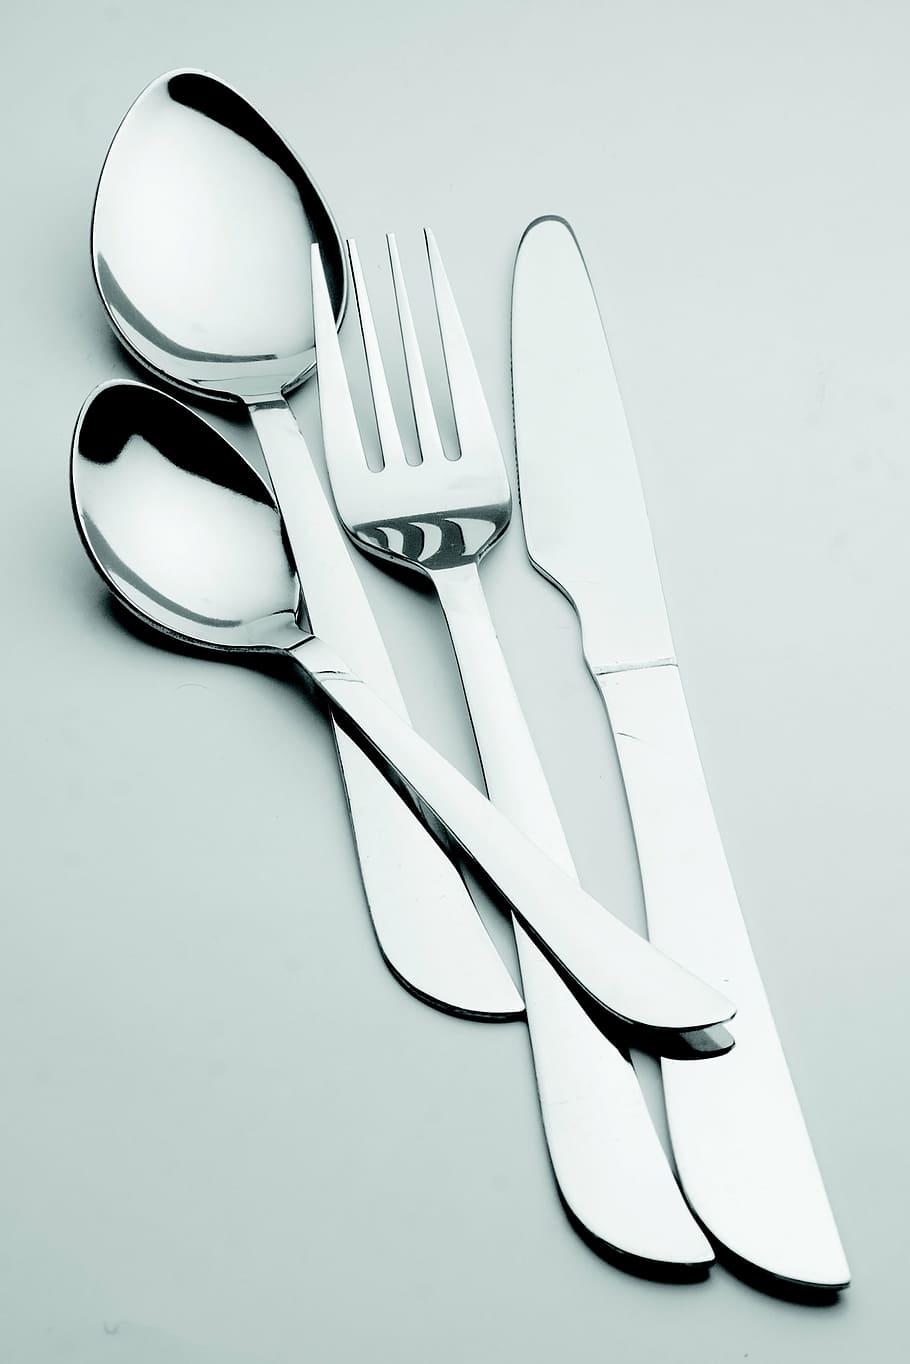 cutlery, steel, elegant, fork, silver colored, studio shot, silver - metal, shiny, white background, close-up